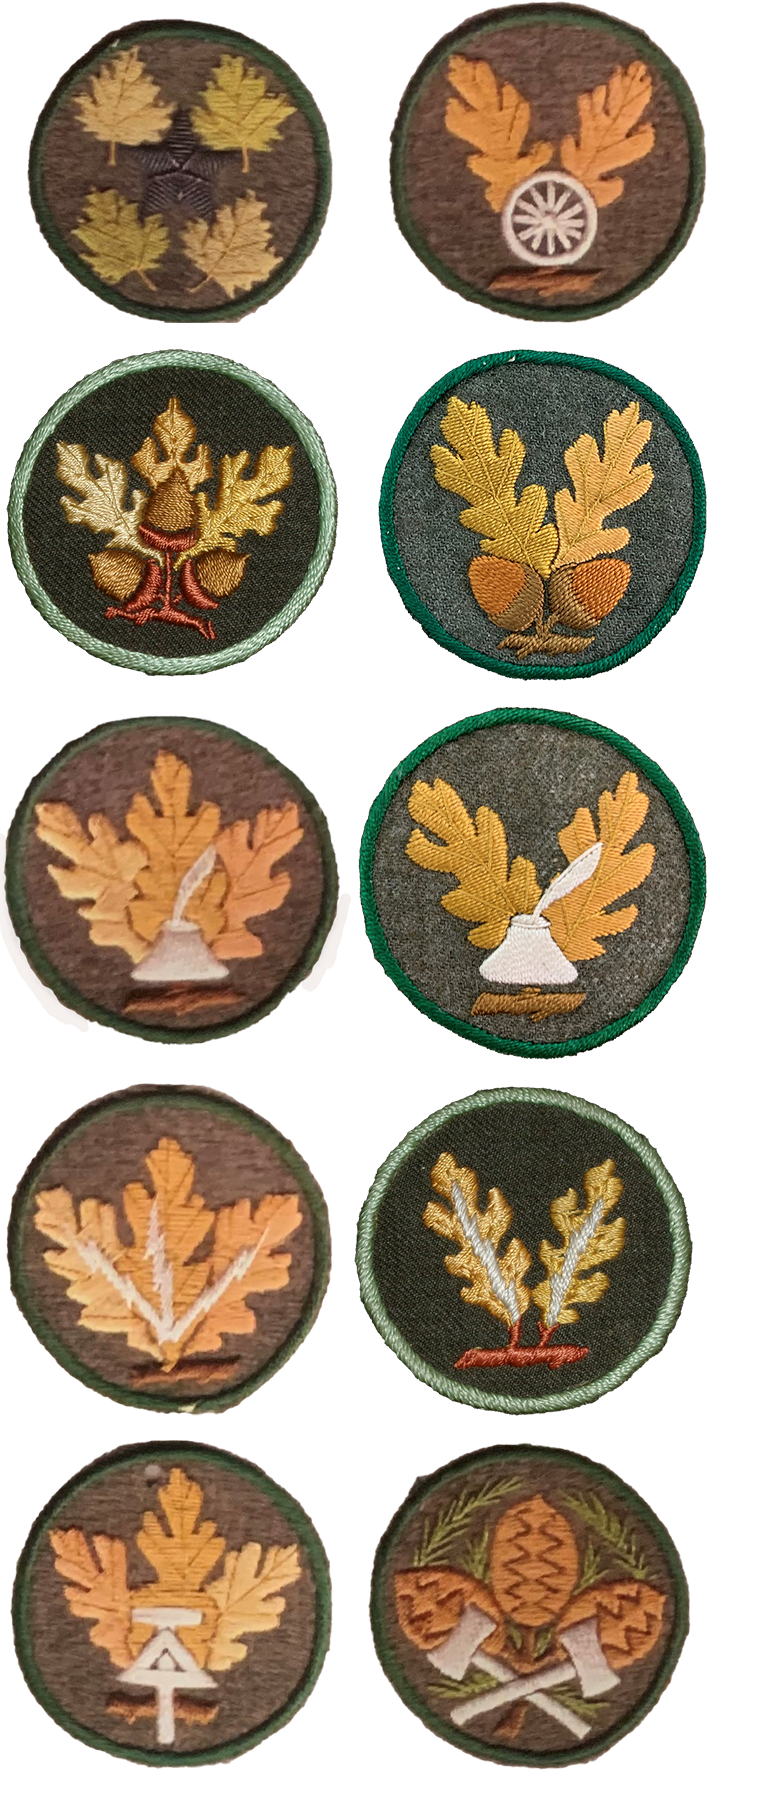 Ten patches with different officer insignia